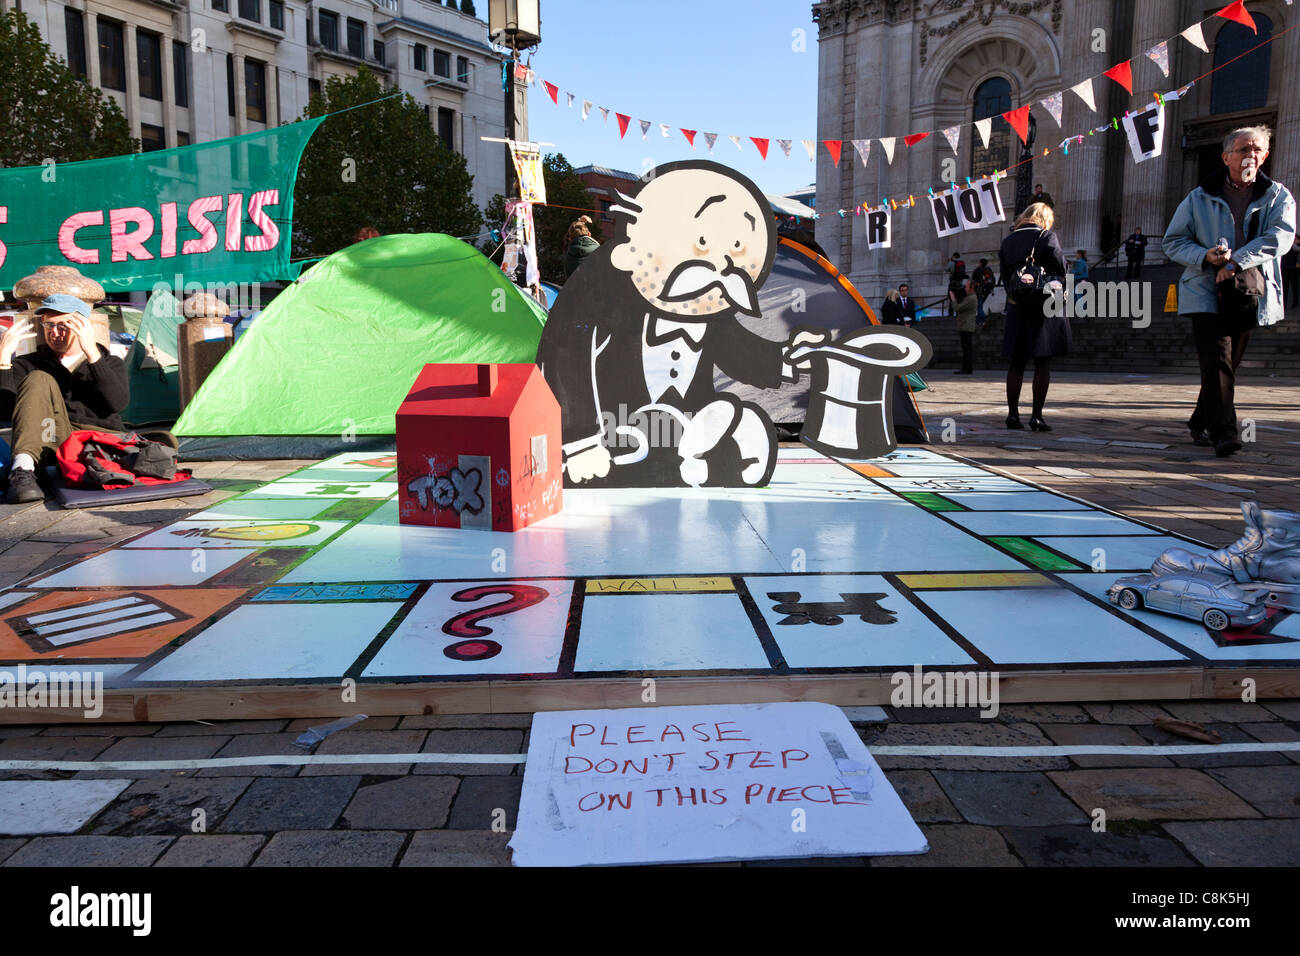 Mock monopoly game forms part of an anti-capitalist protest camp outside St Paul's Cathedral, London, October, 2011. Stock Photo